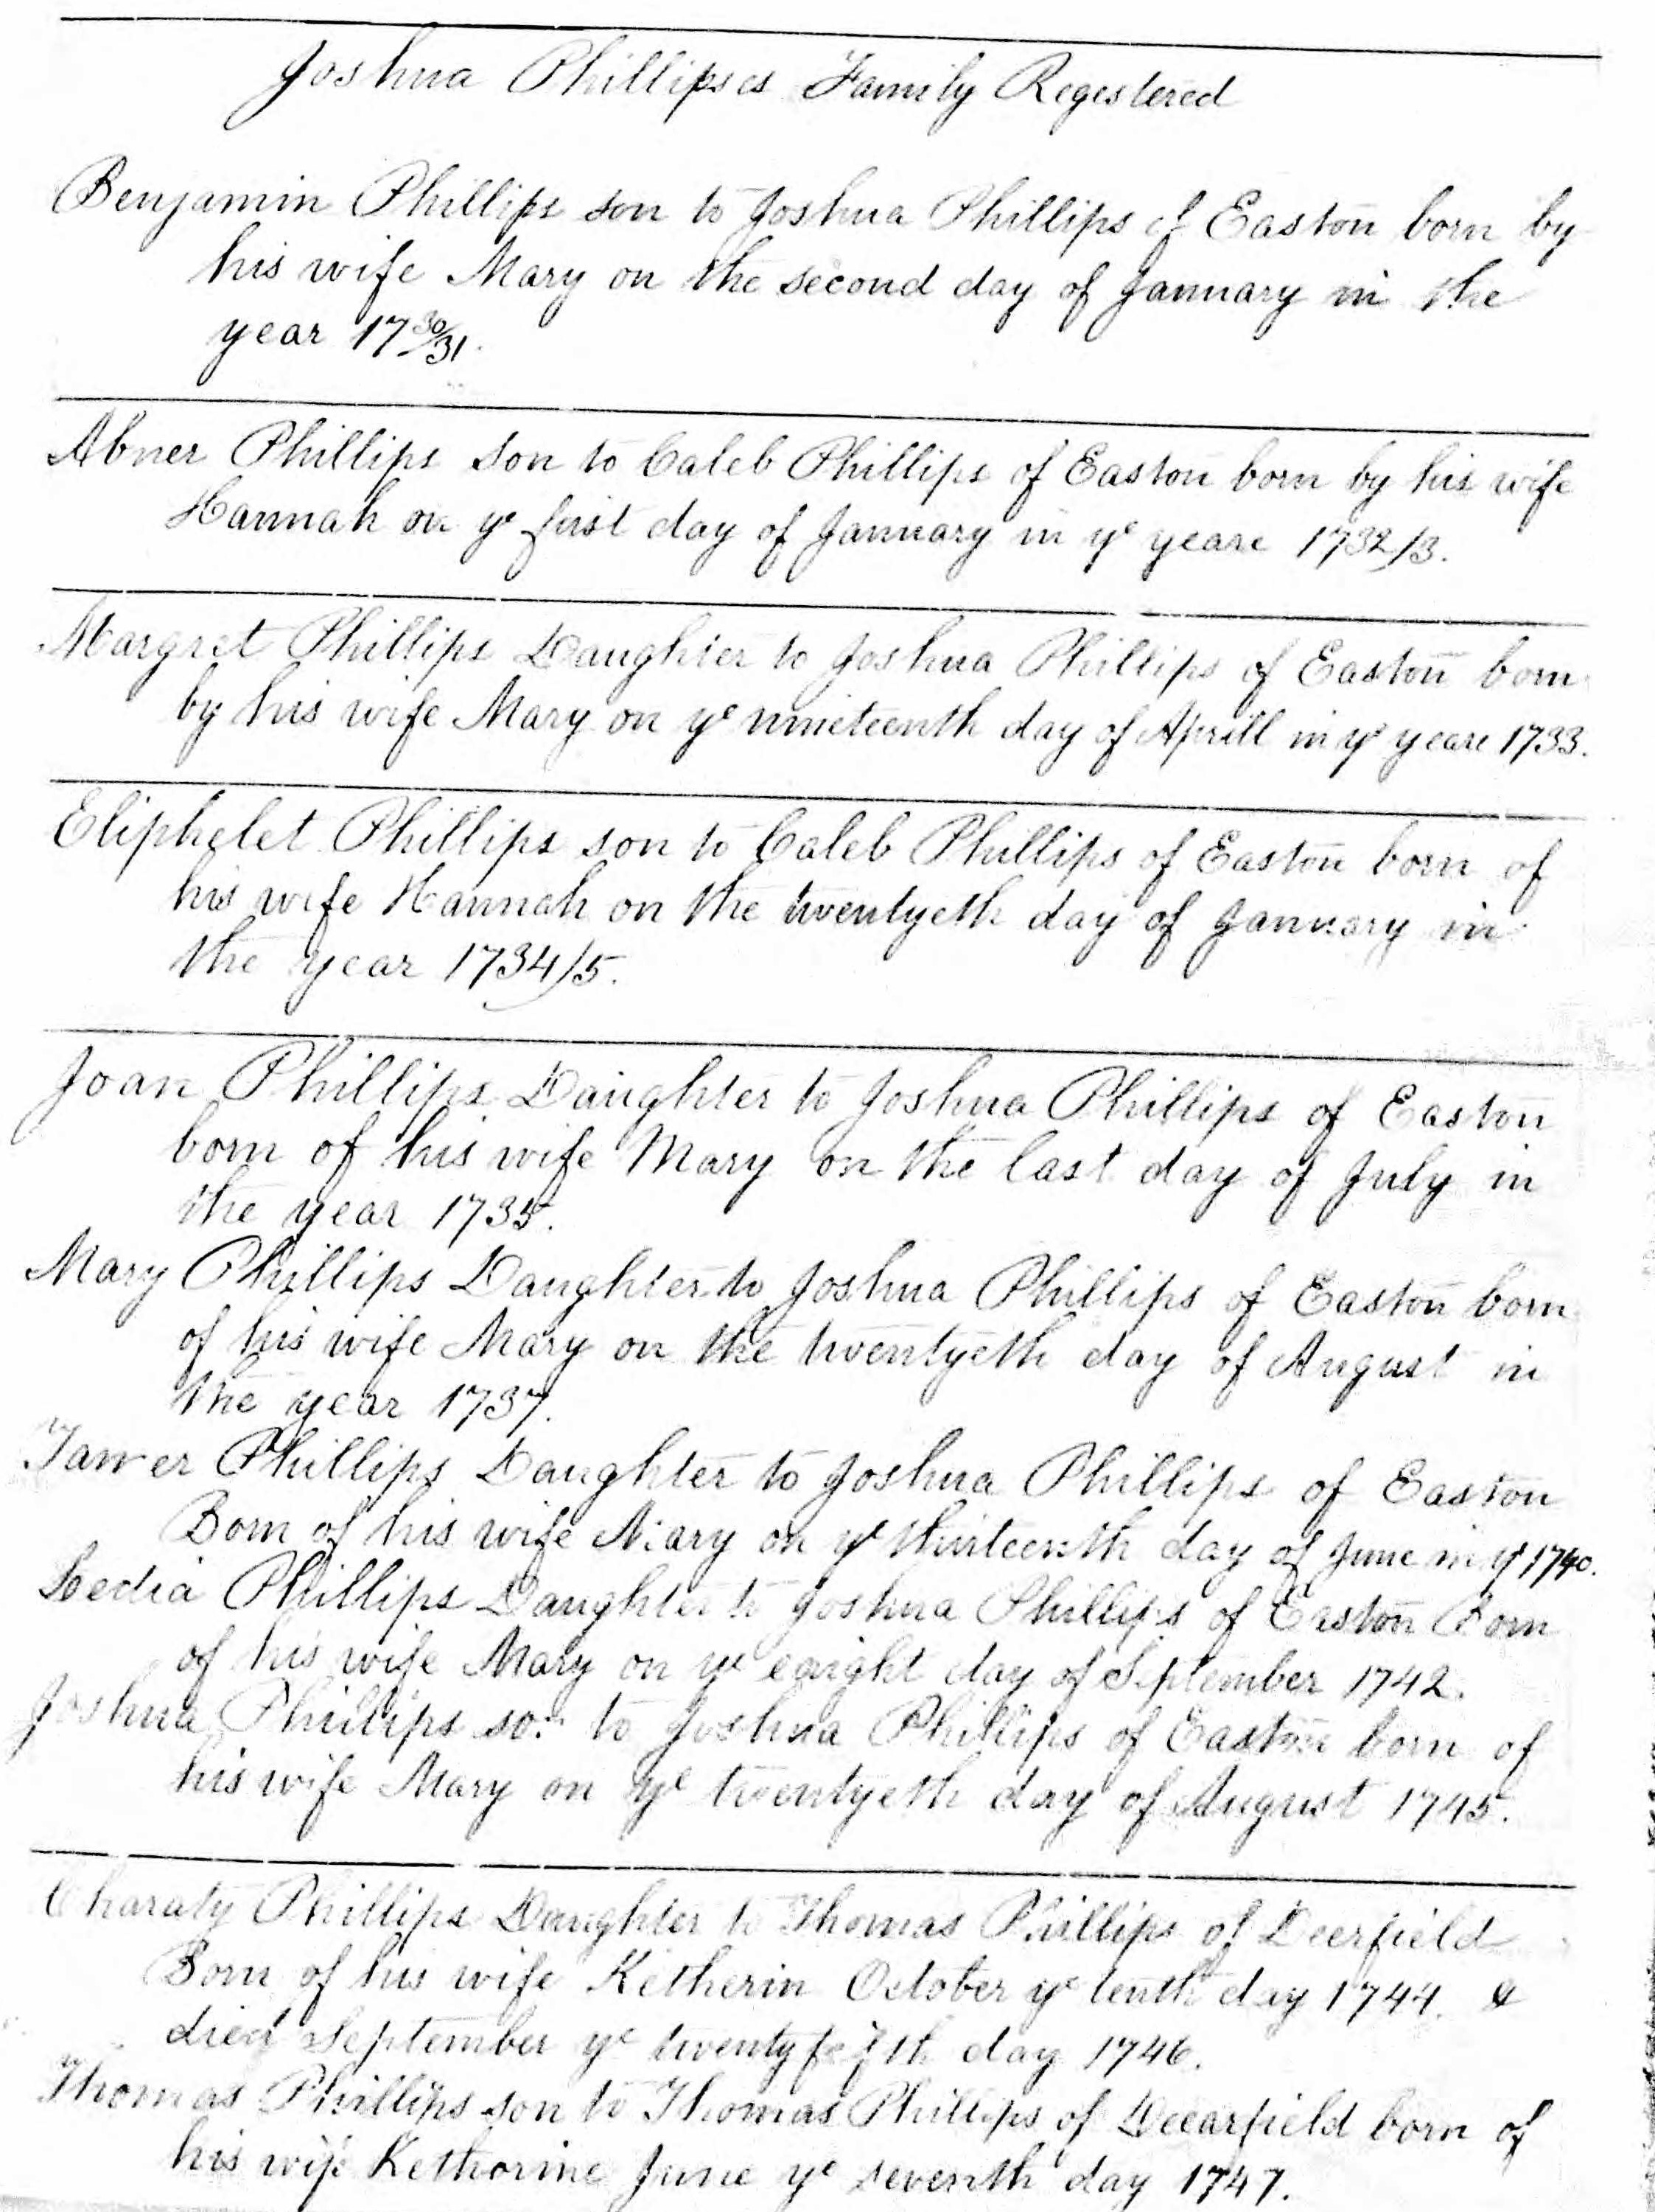 Family Registers of Joshua, Caleb, and Thomas Phillips' families, page 1